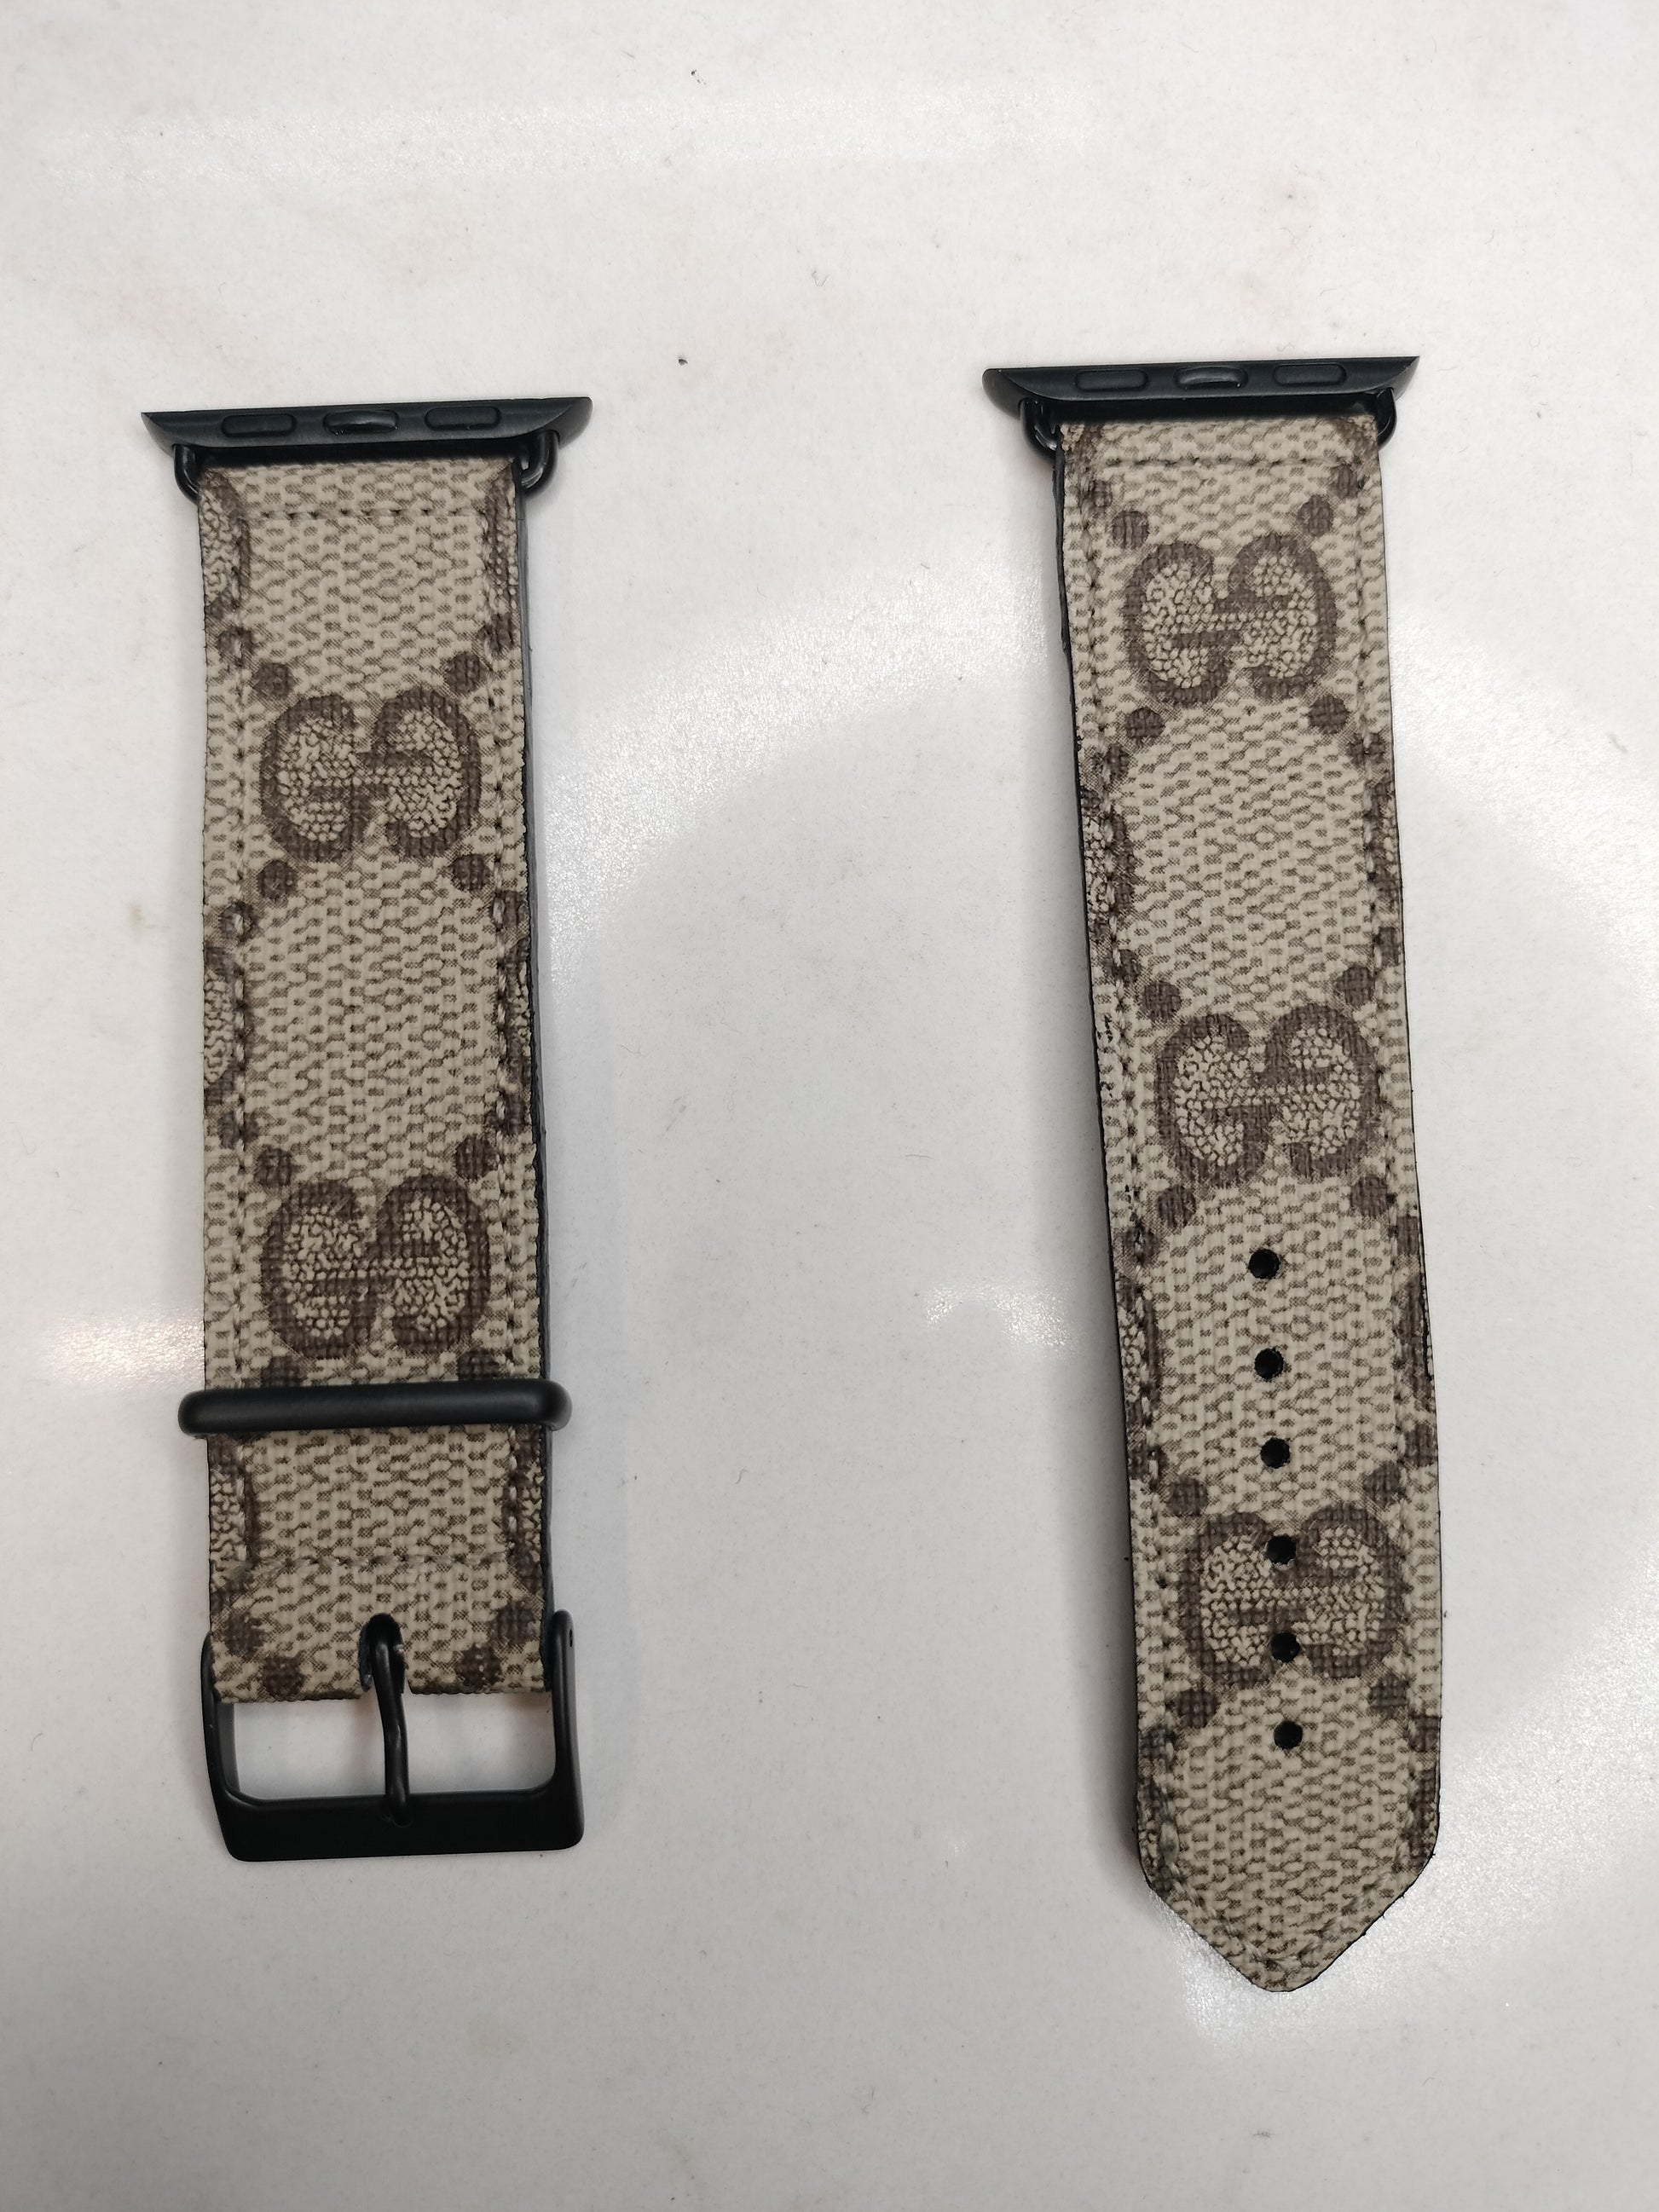 Gucci, Accessories, Gucci Apple Watch Band Upcycled